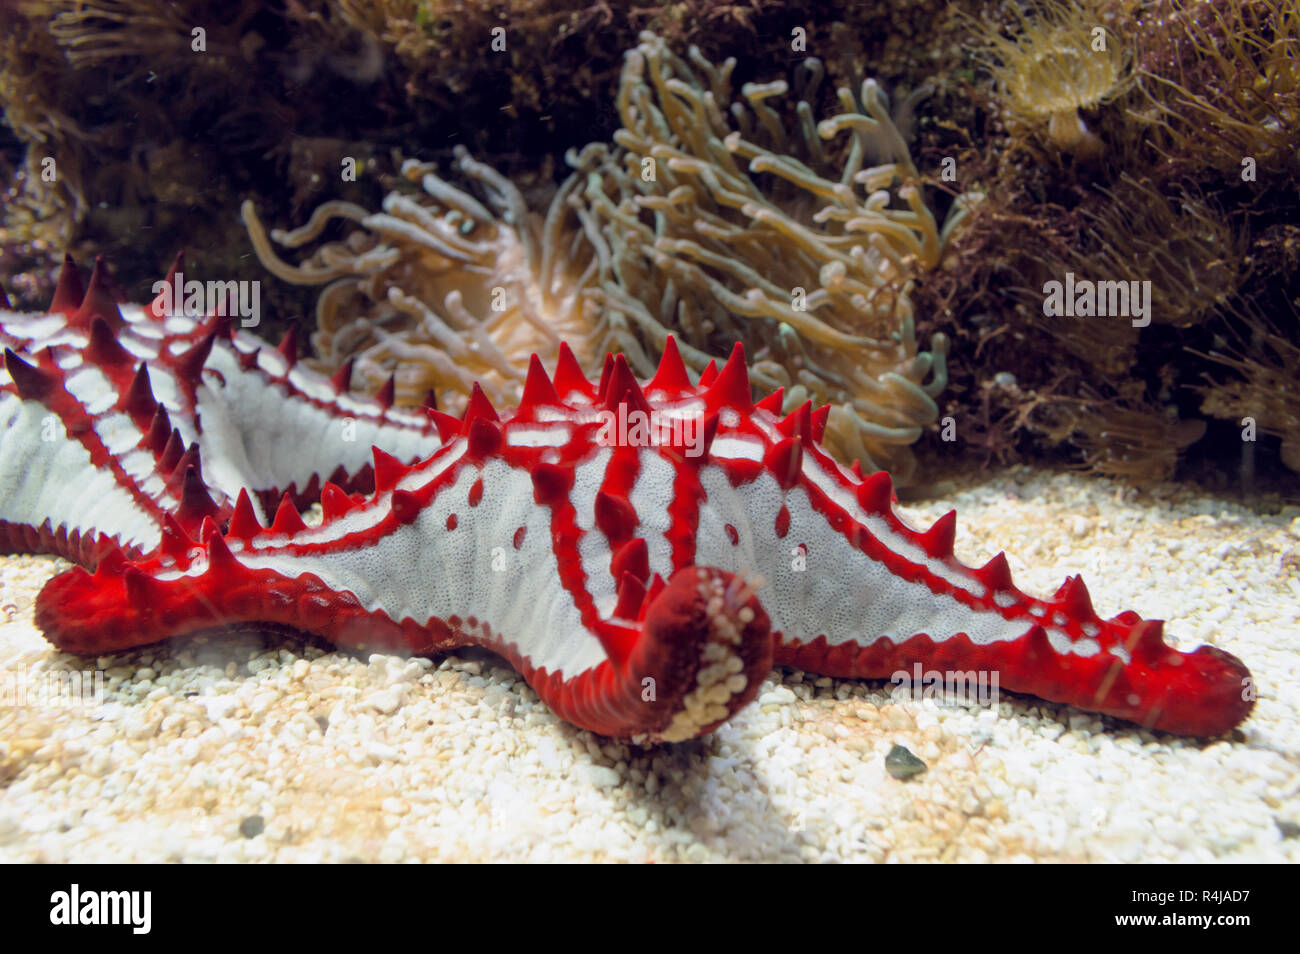 close up view of red-knobbed starfish with sea anemones on background Stock Photo